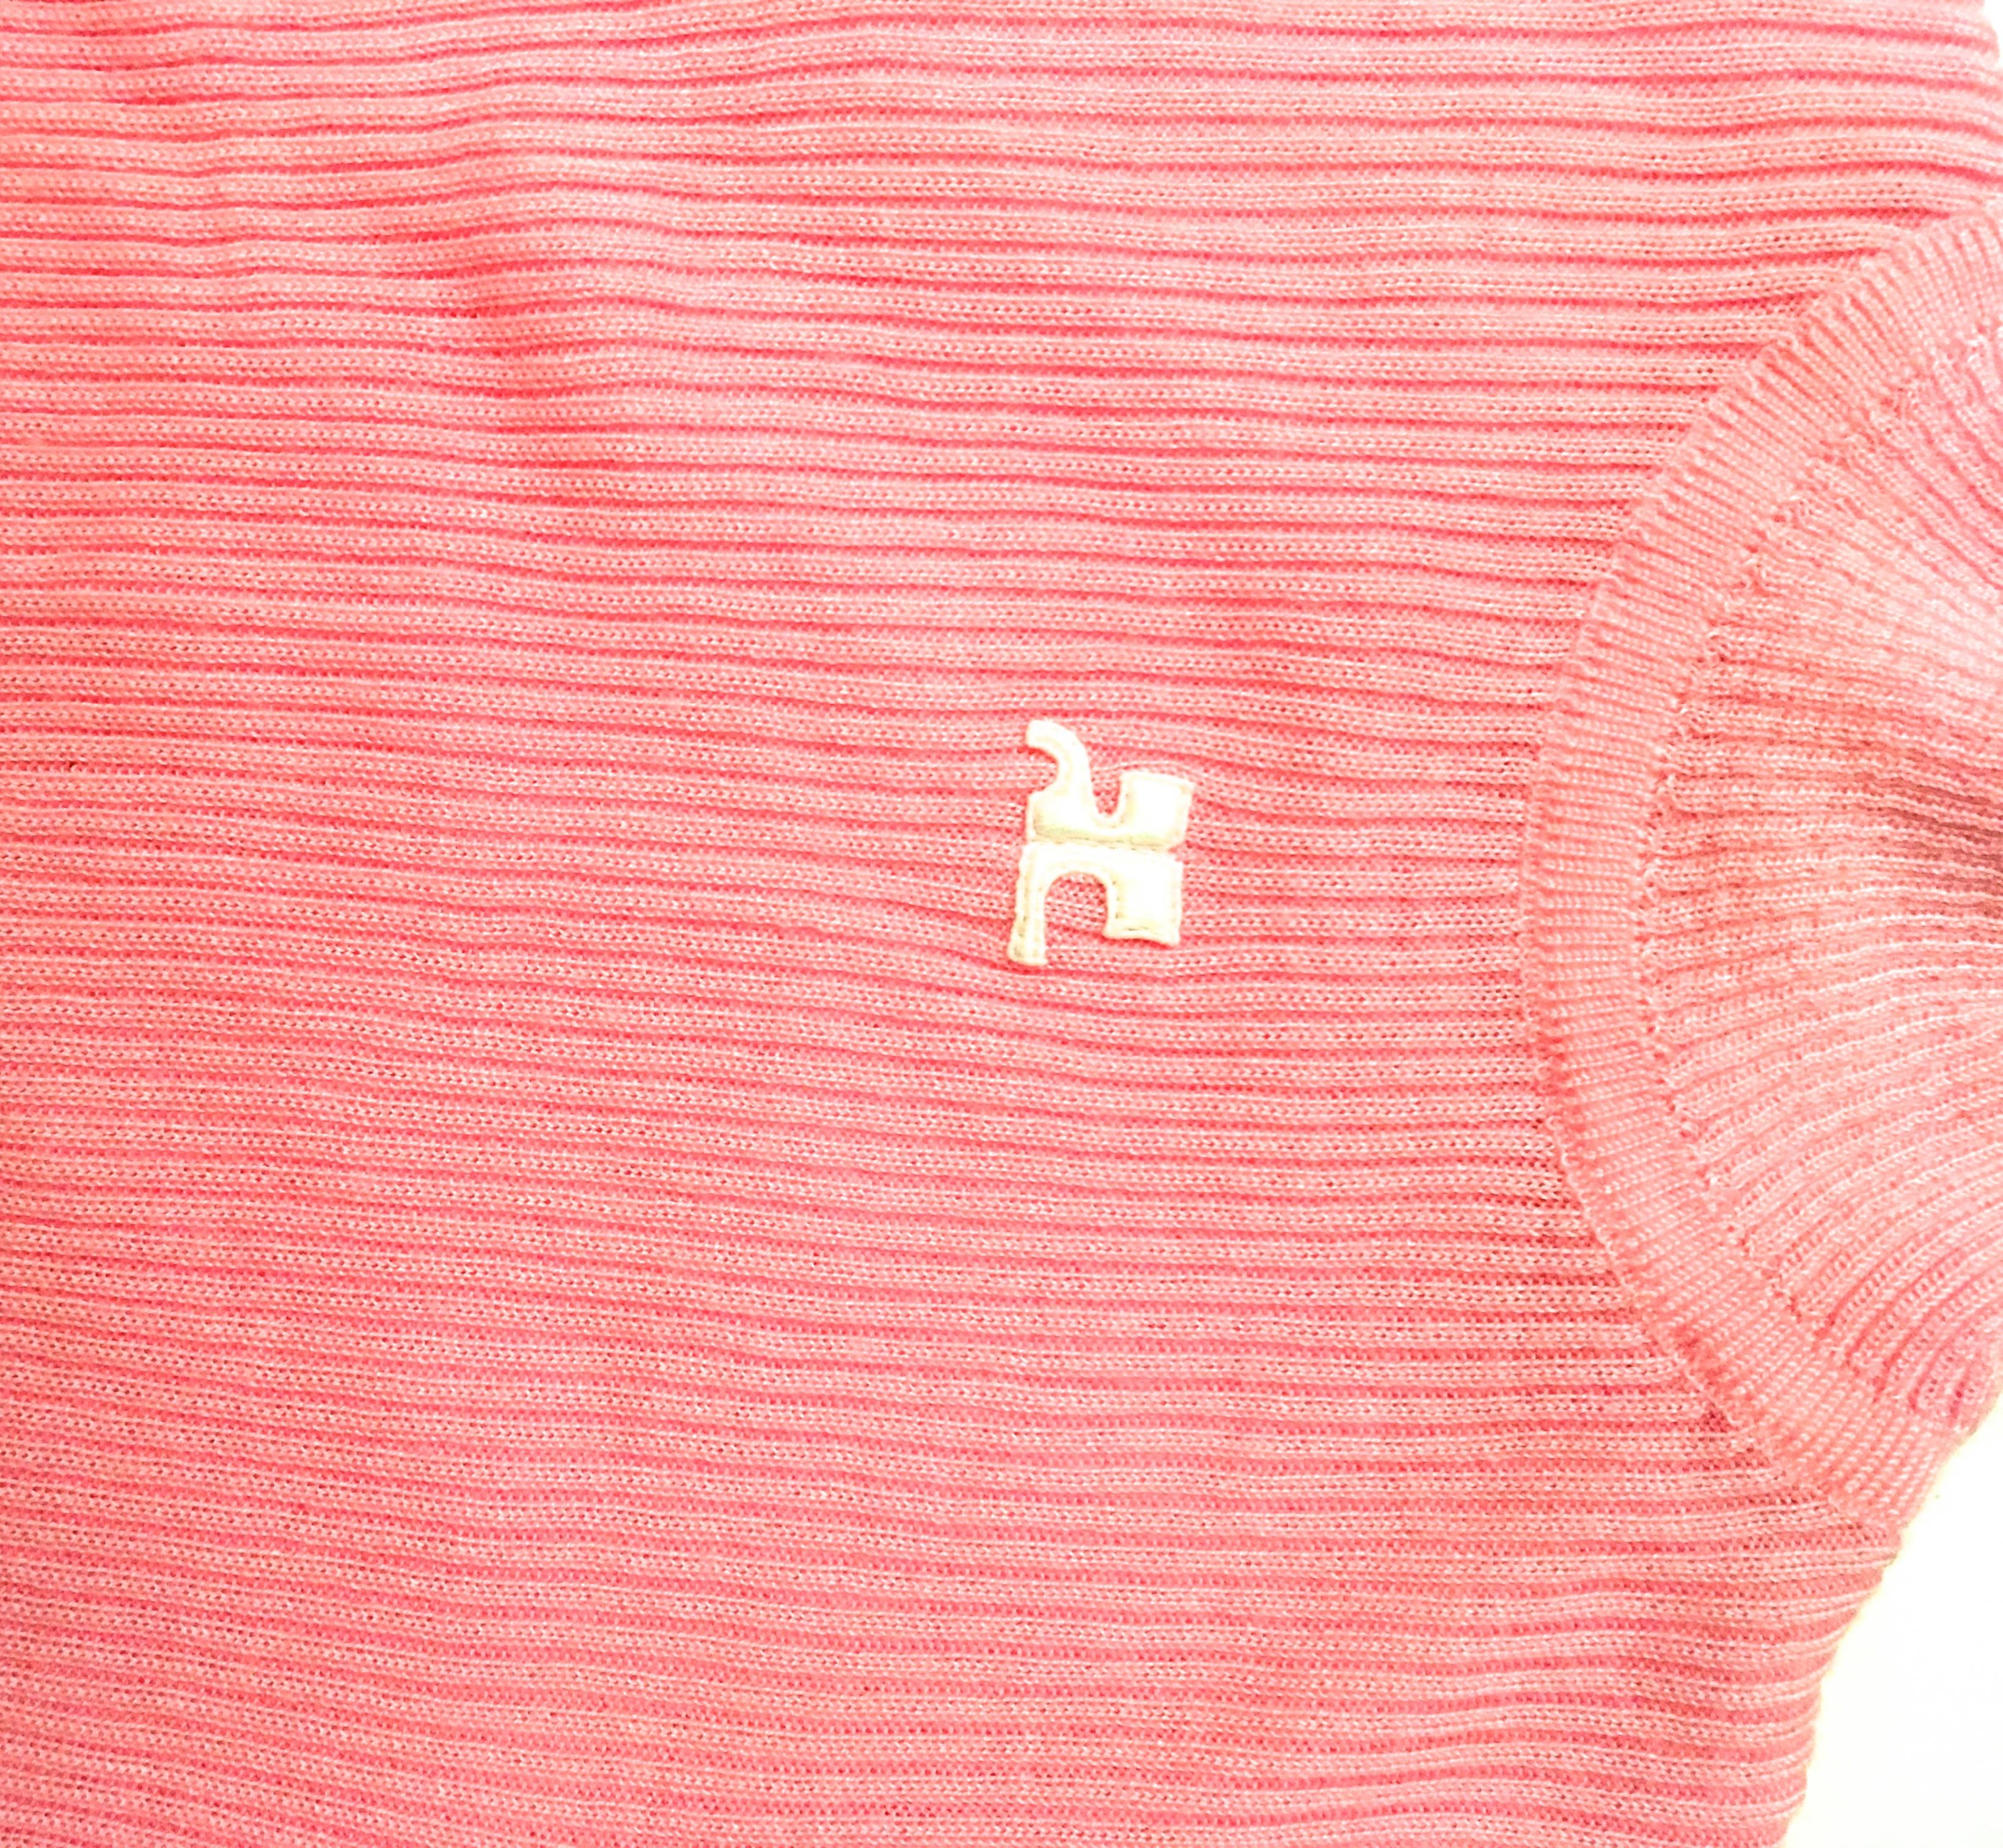 Women's Courreges Sweater - Short Sleeve - Pink - 1970's - Mint Condition For Sale